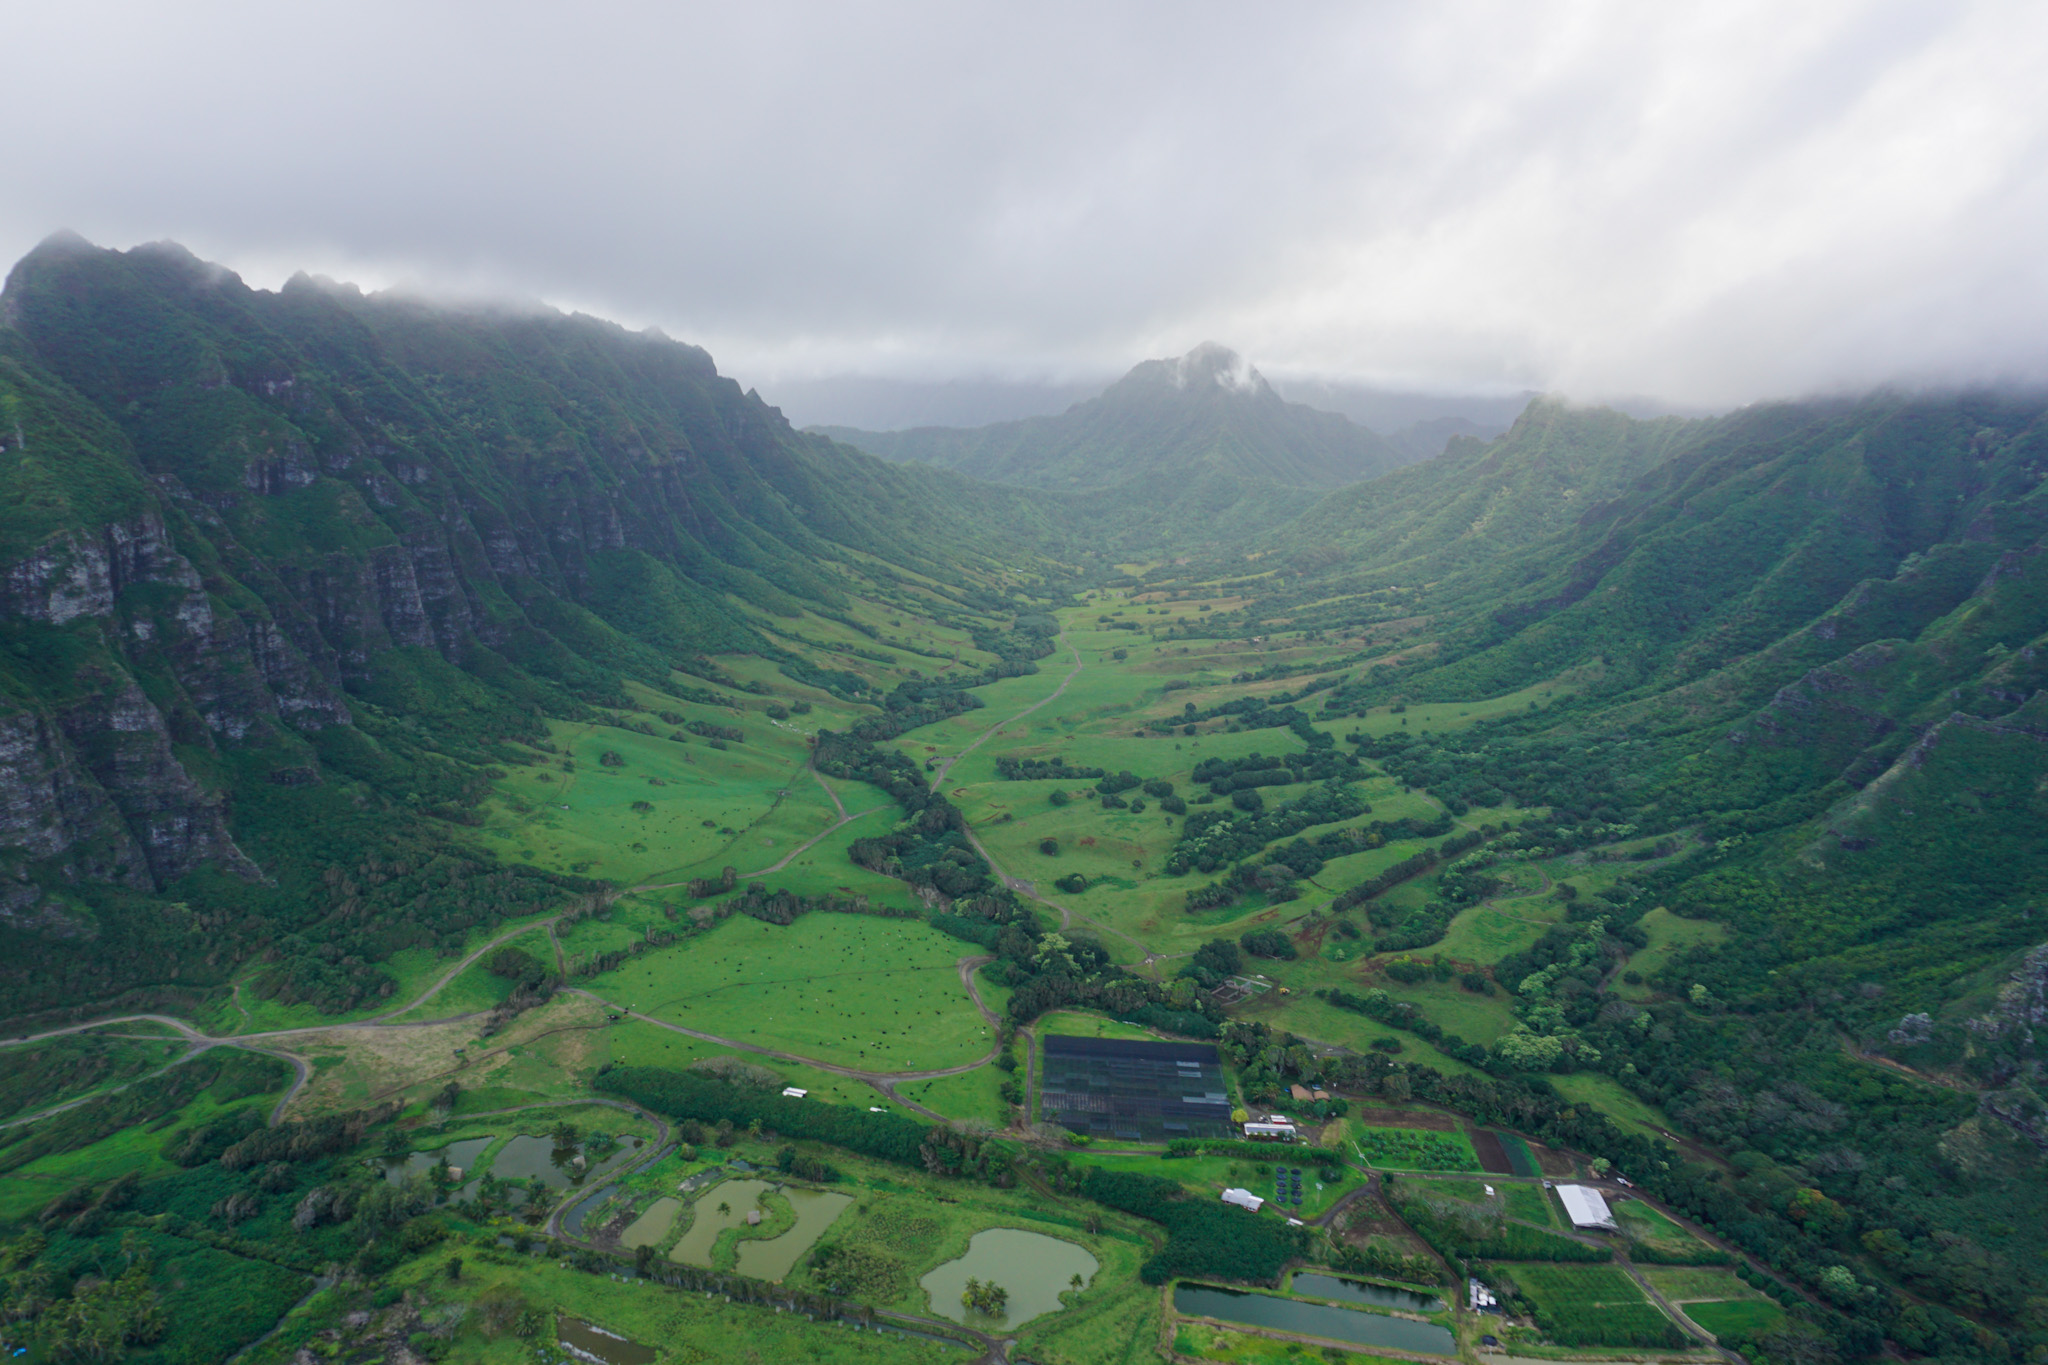 Kualoa Ranch View from Helicopter